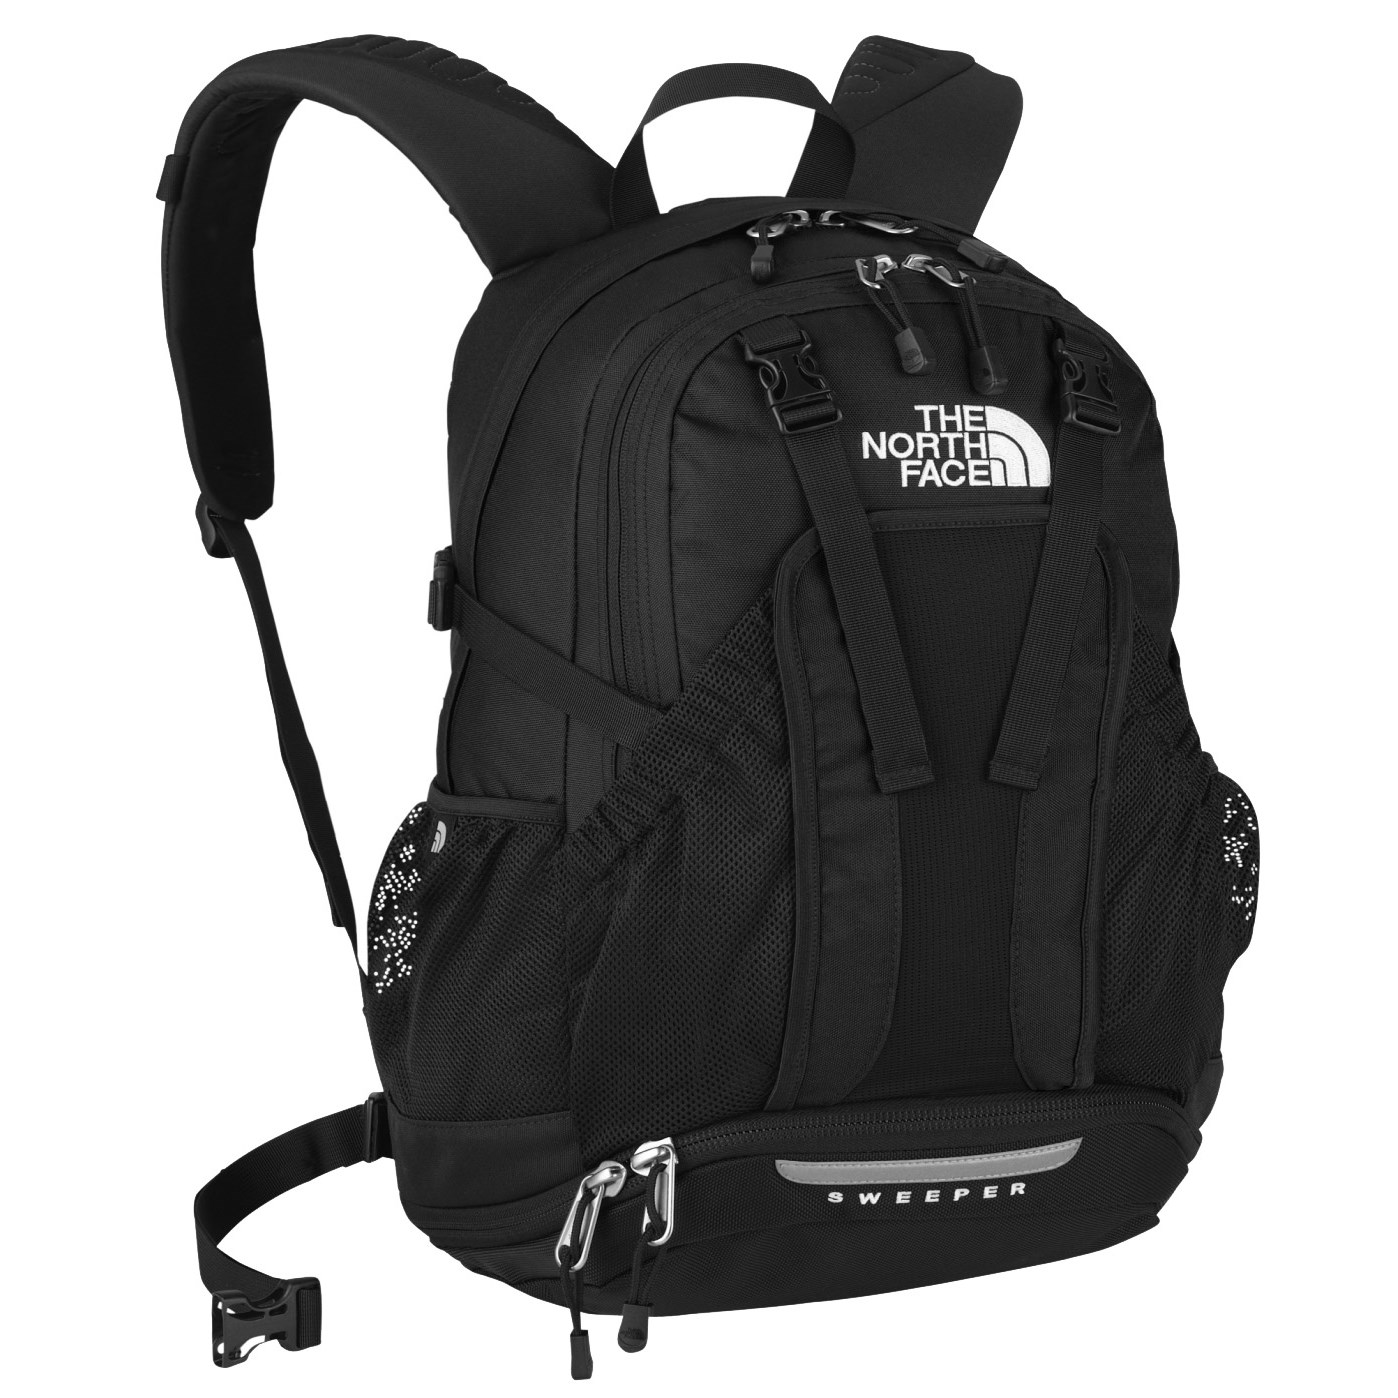 The North Face Sweeper Backpack | evo